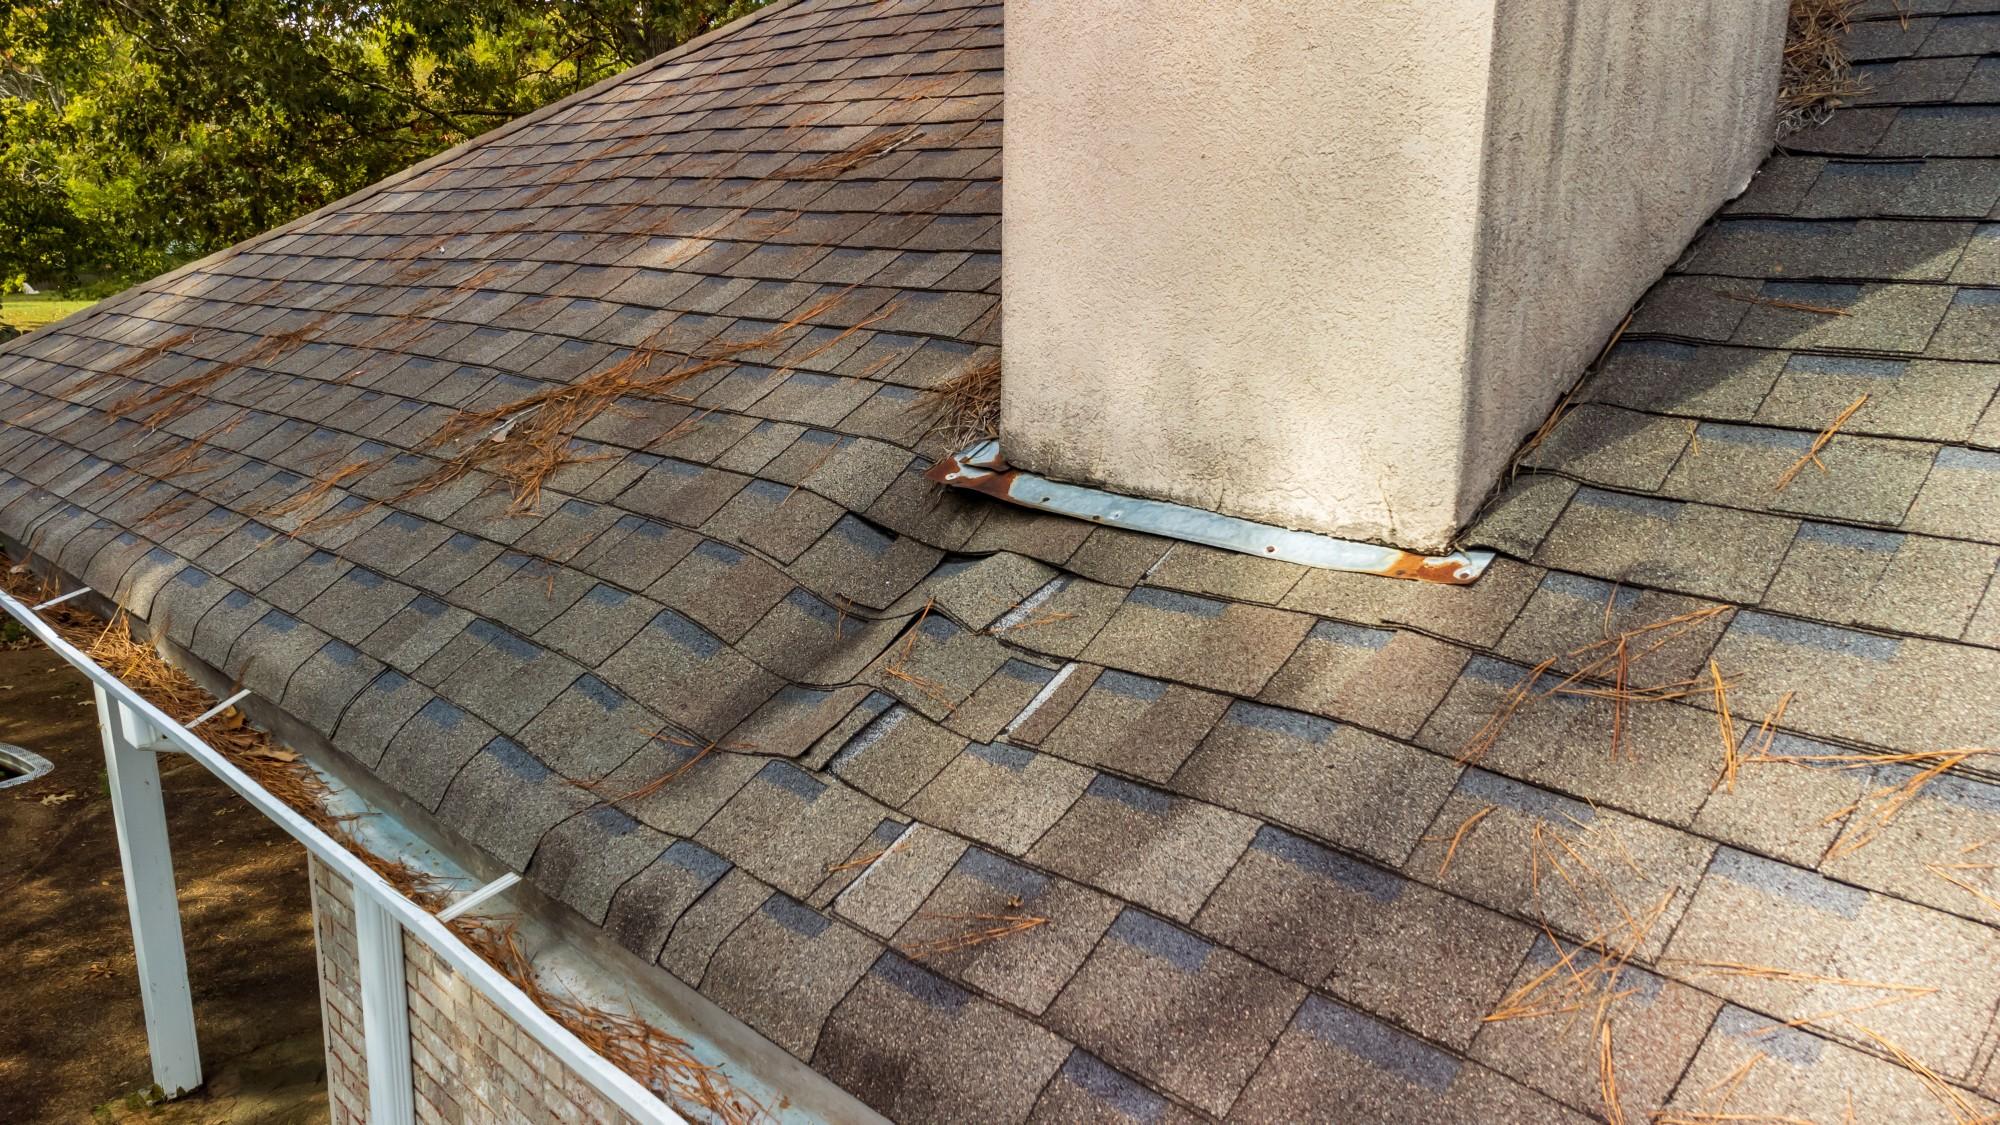 Should I Replace My Roof If It’s Not Leaking?